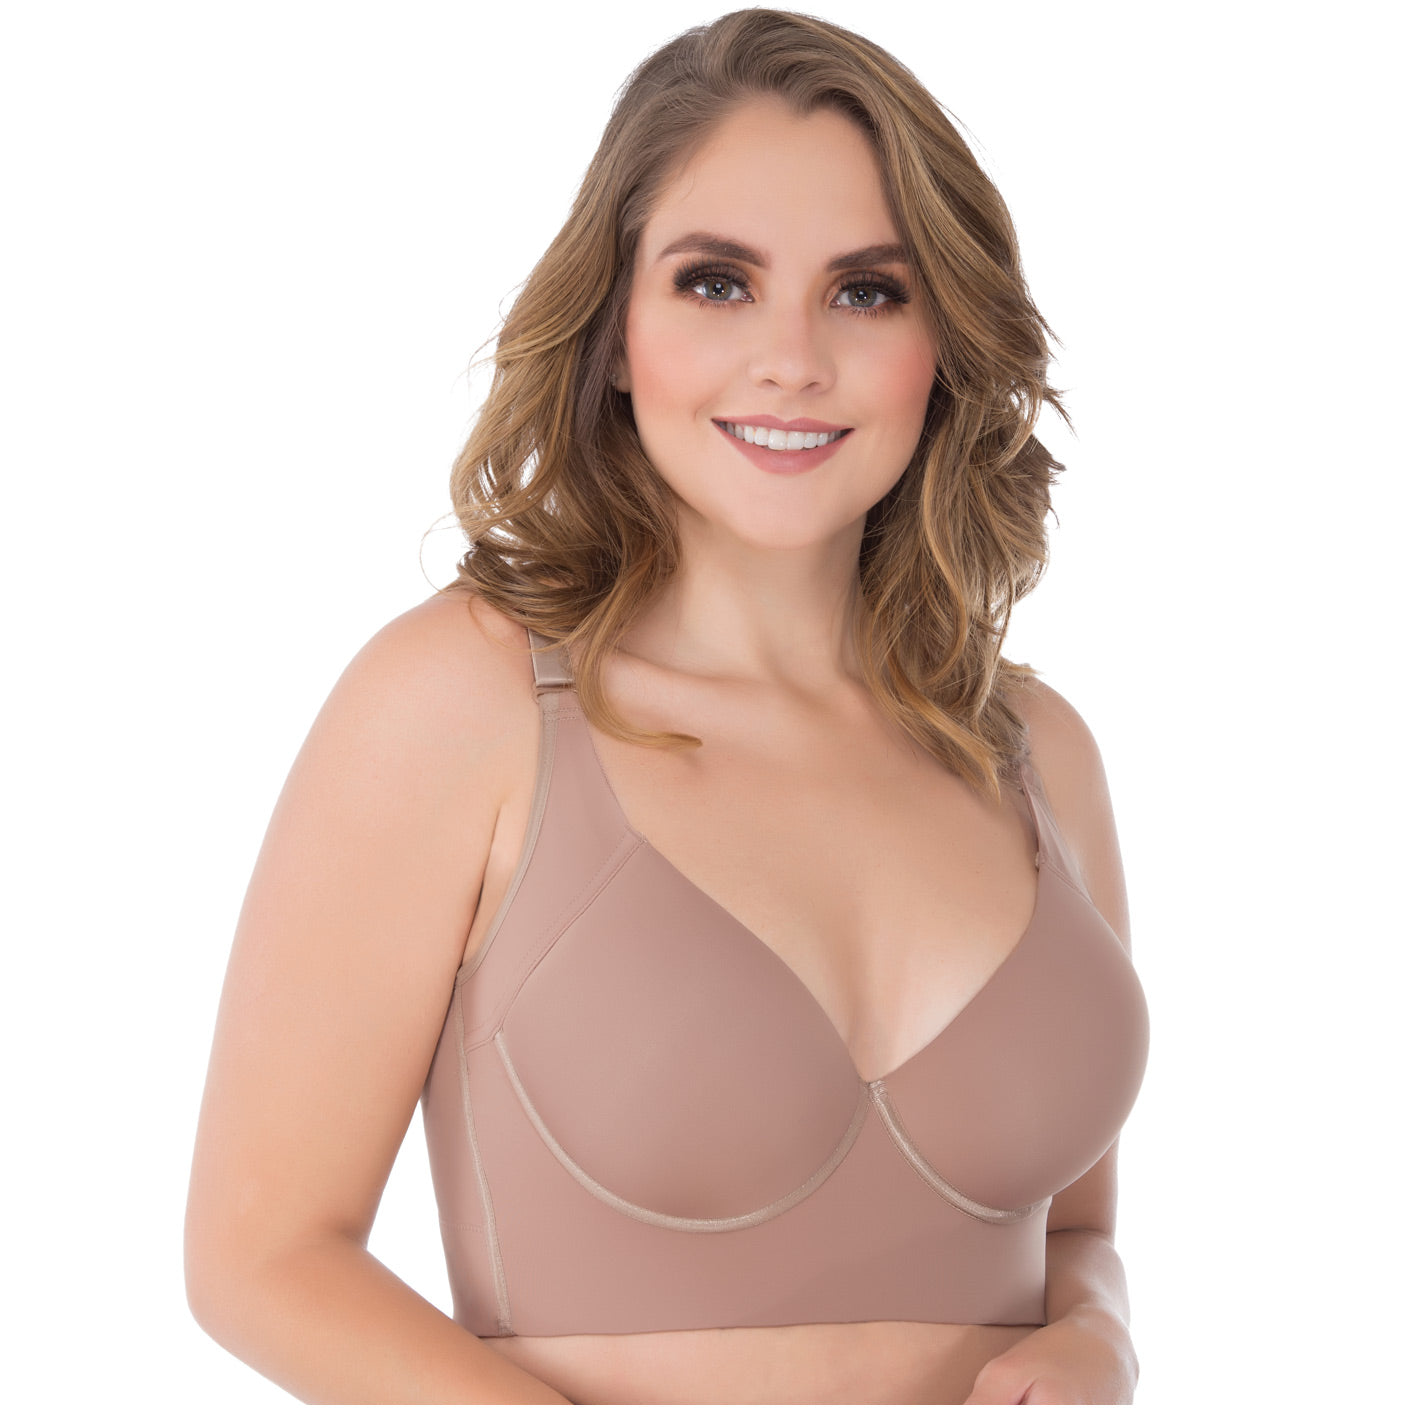 UpLady 8532 - Extra Firm High Compression Full Cup Push Up Bra